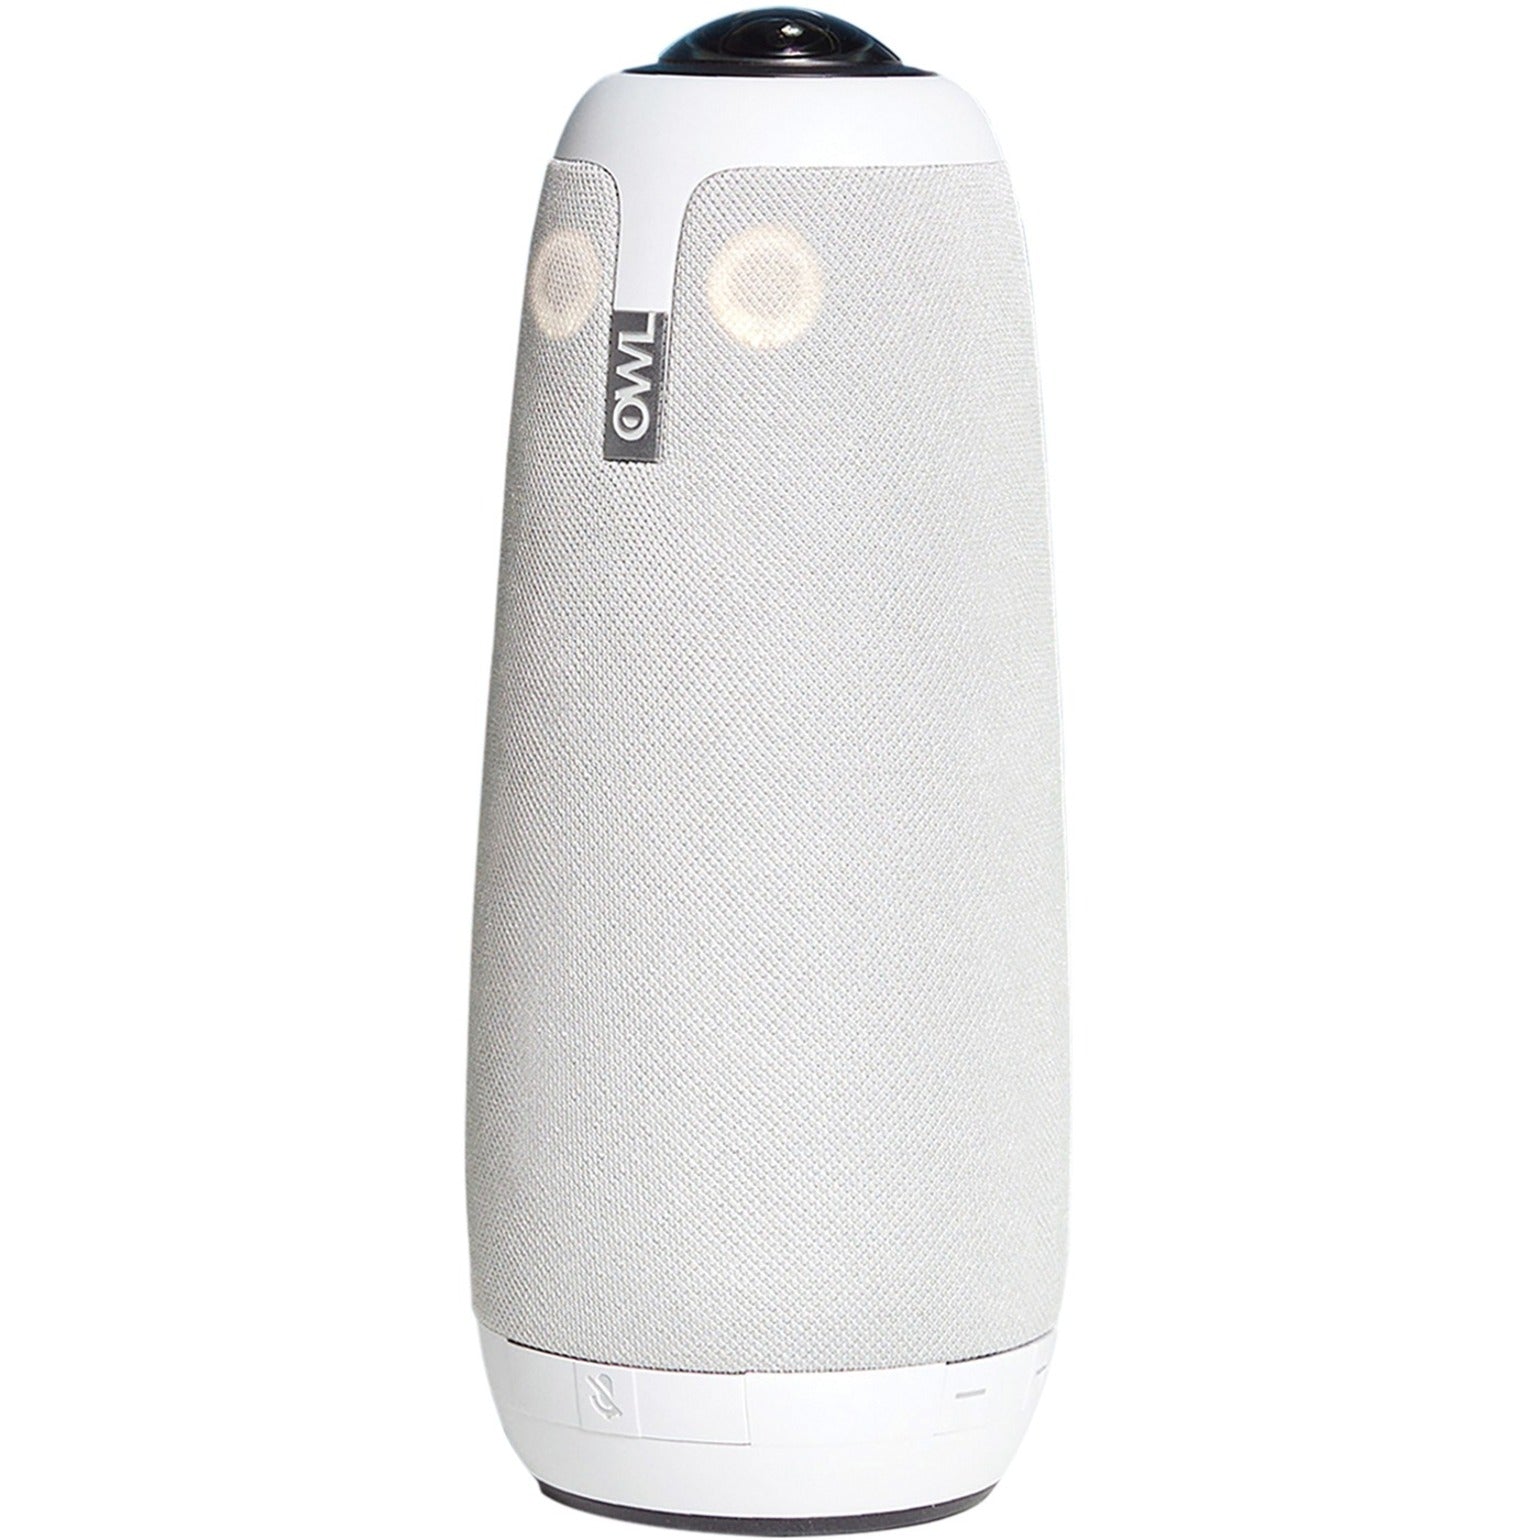 Owl Labs Meeting Owl Pro Video Conferencing Camera - USB (PPK200-0000) [Discontinued]